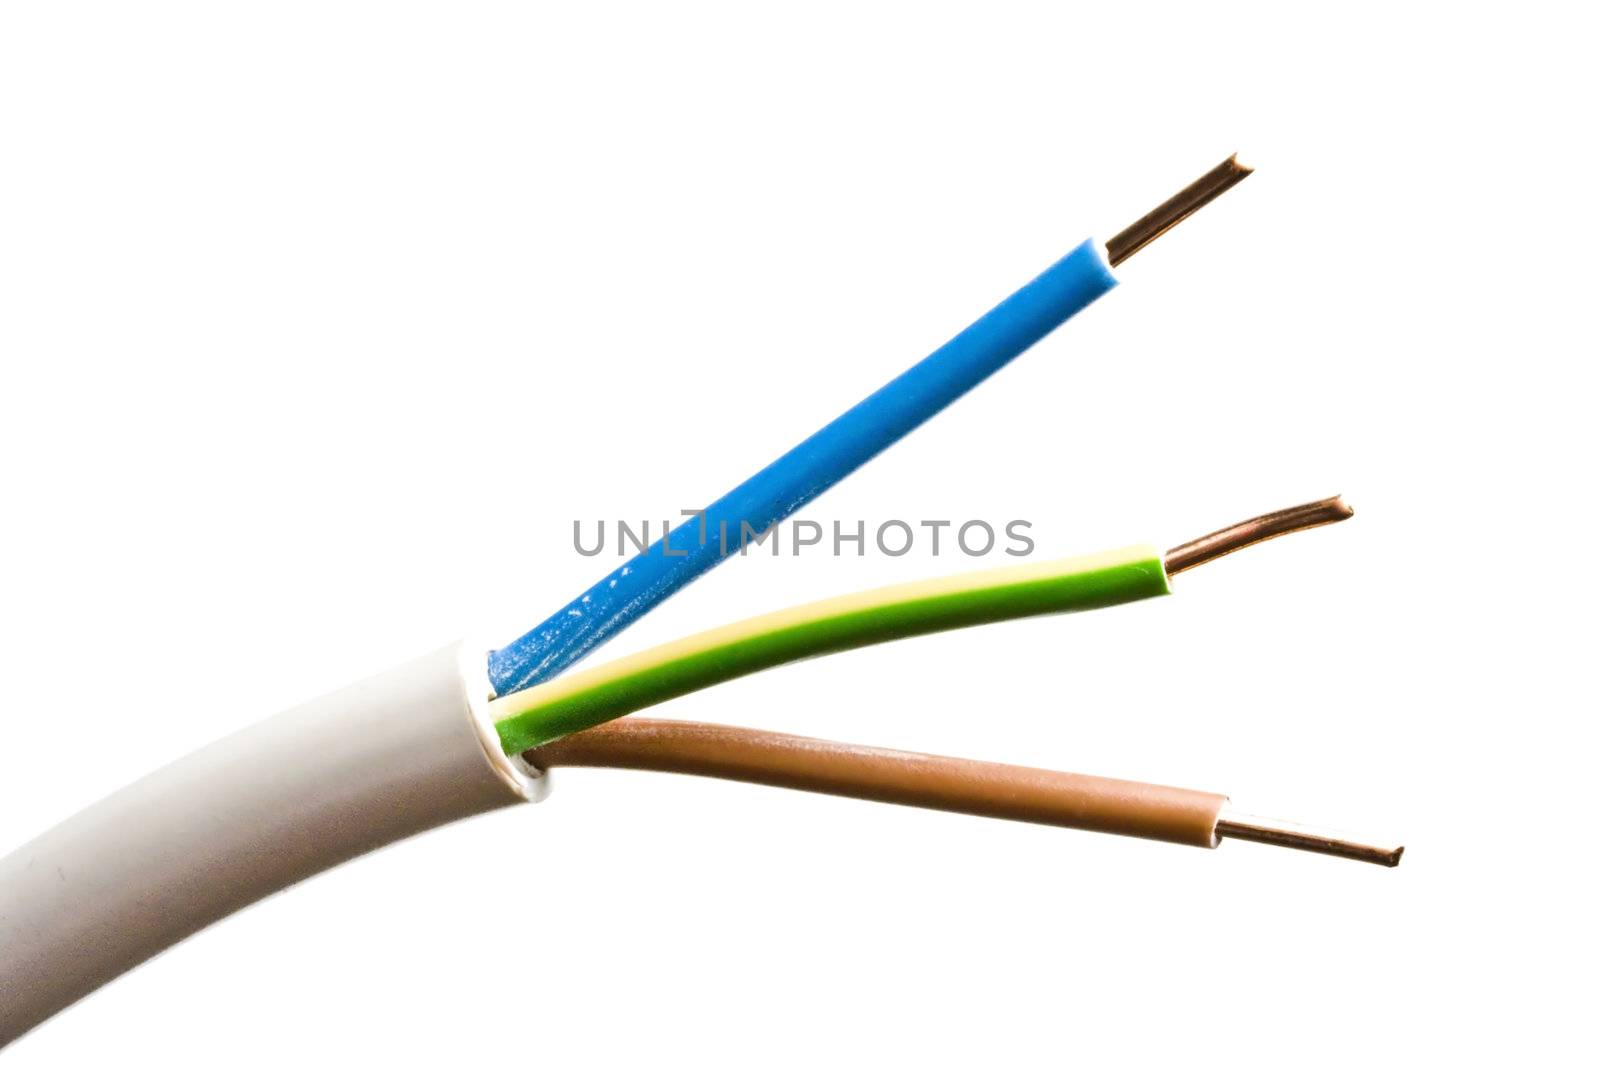 colorful electrical wire by ibphoto